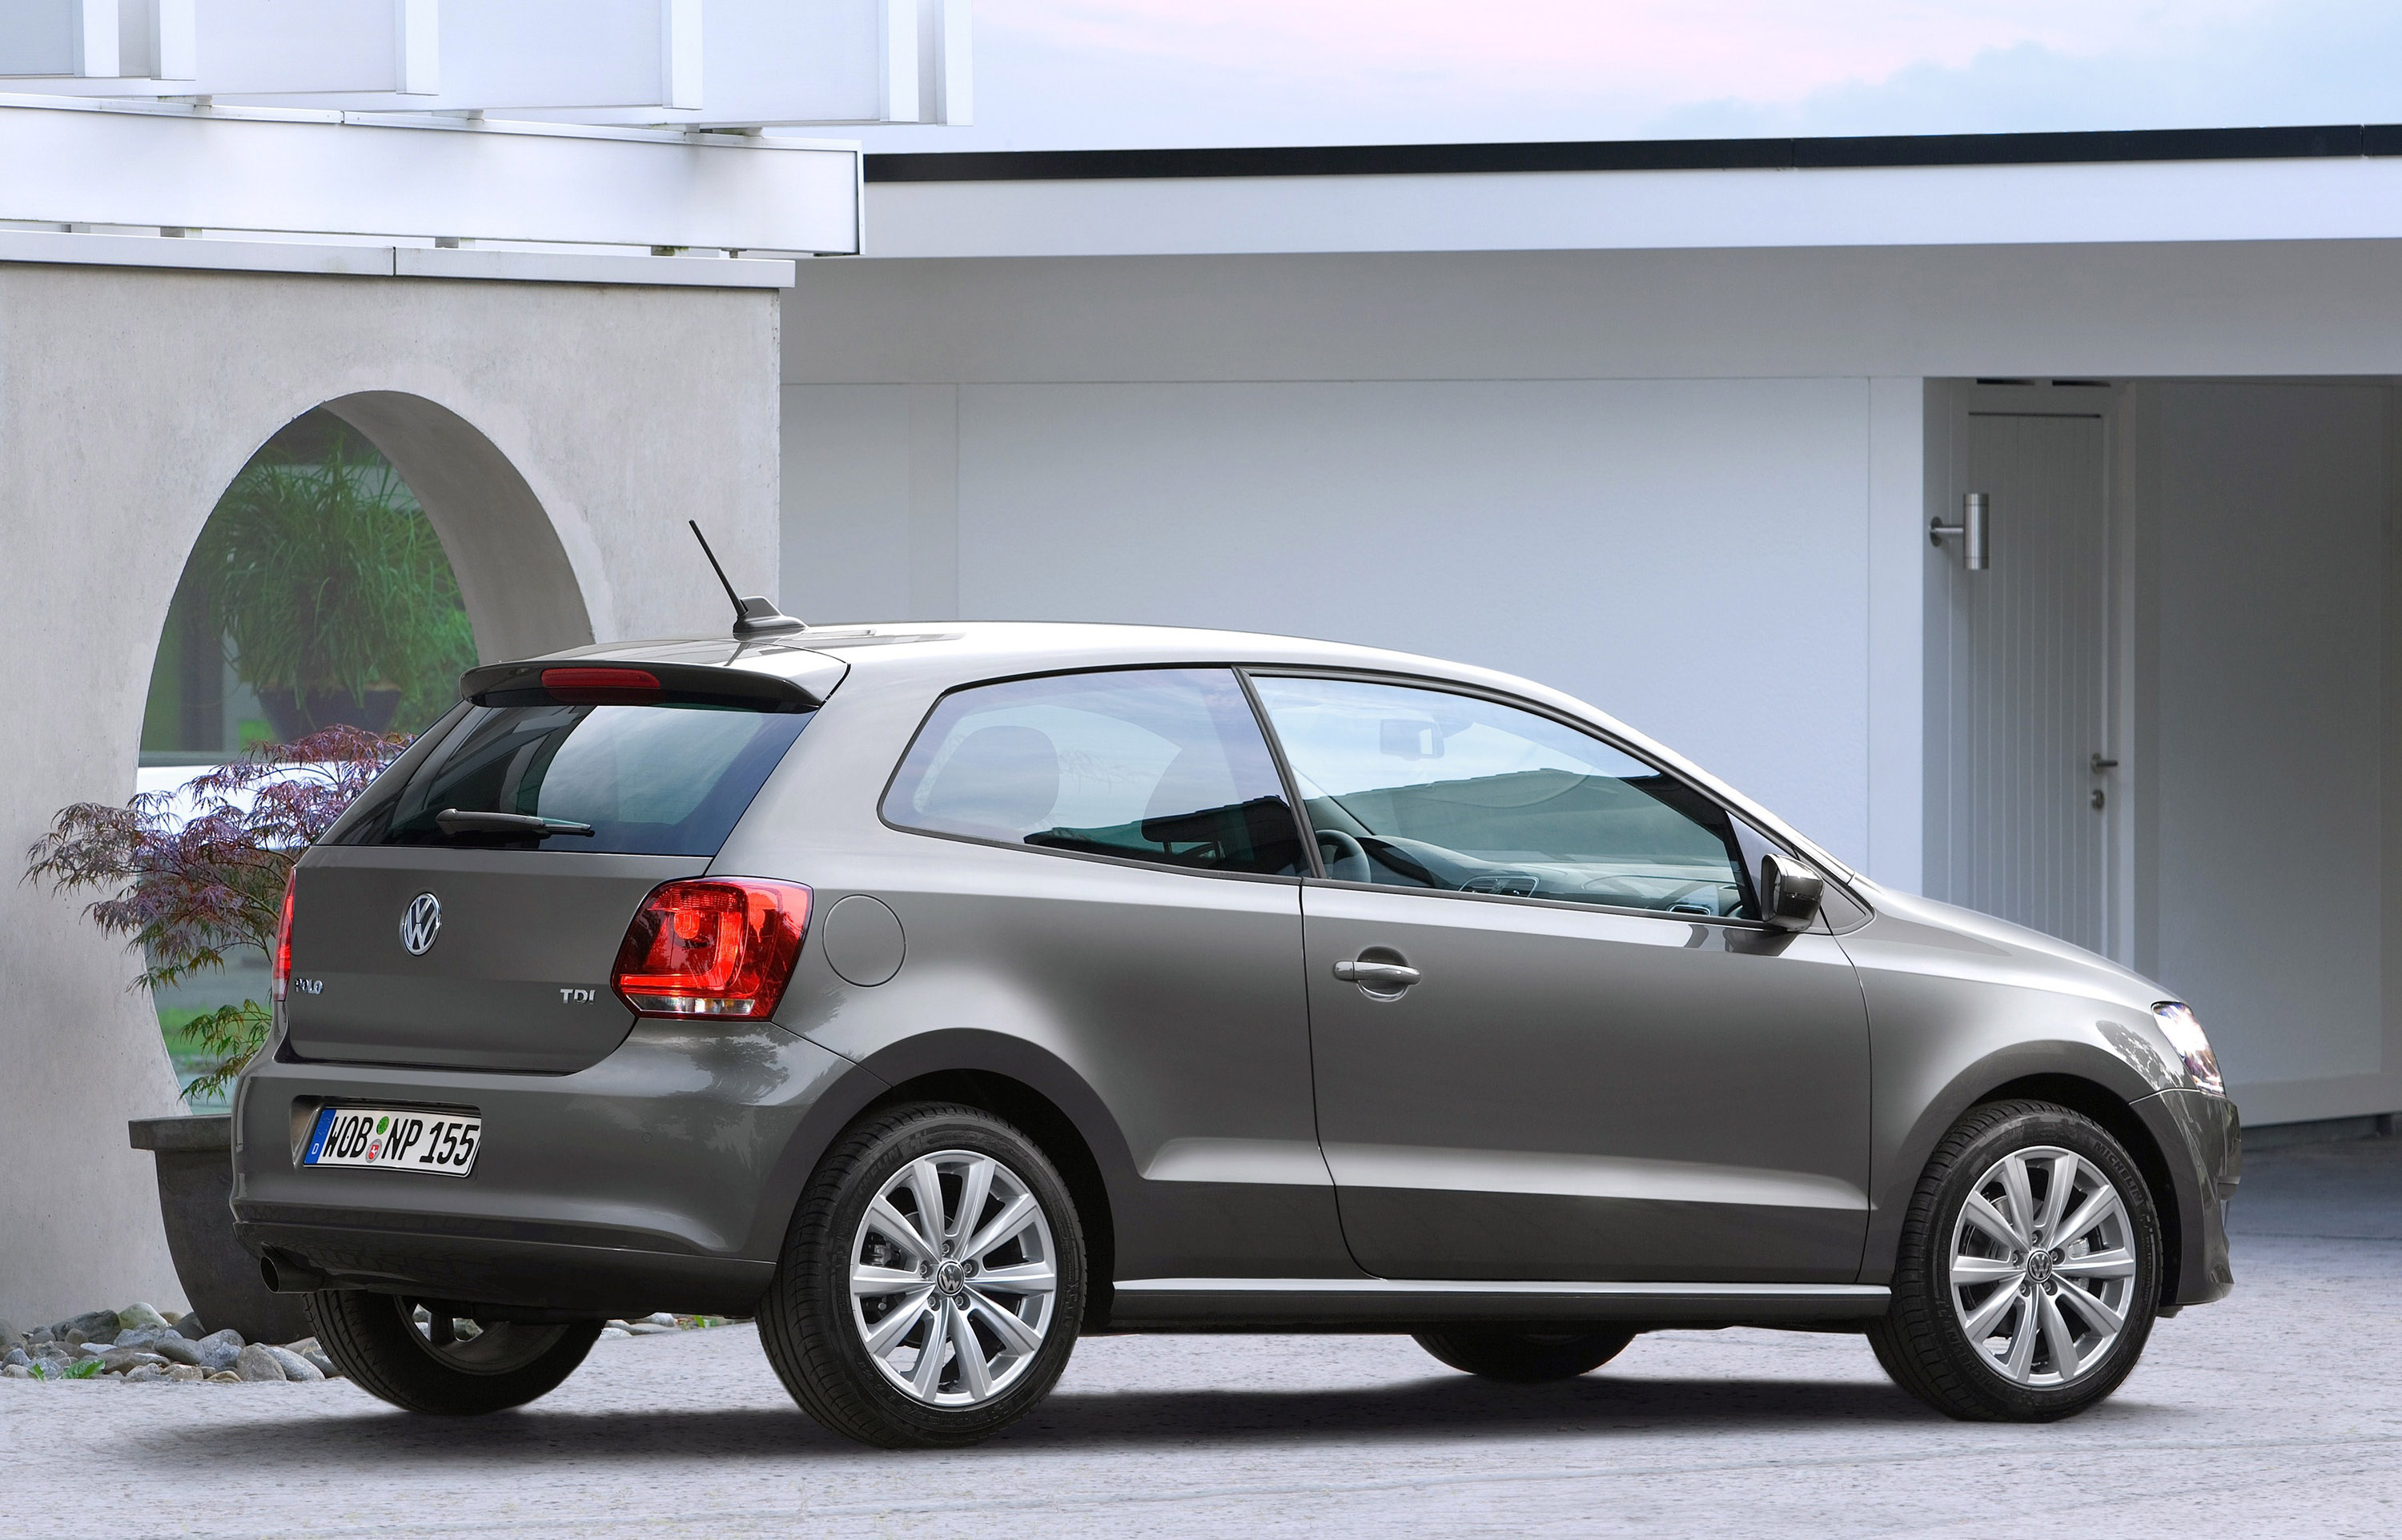 Volkswagen's 1.2 TSI Engine is now available for Polo